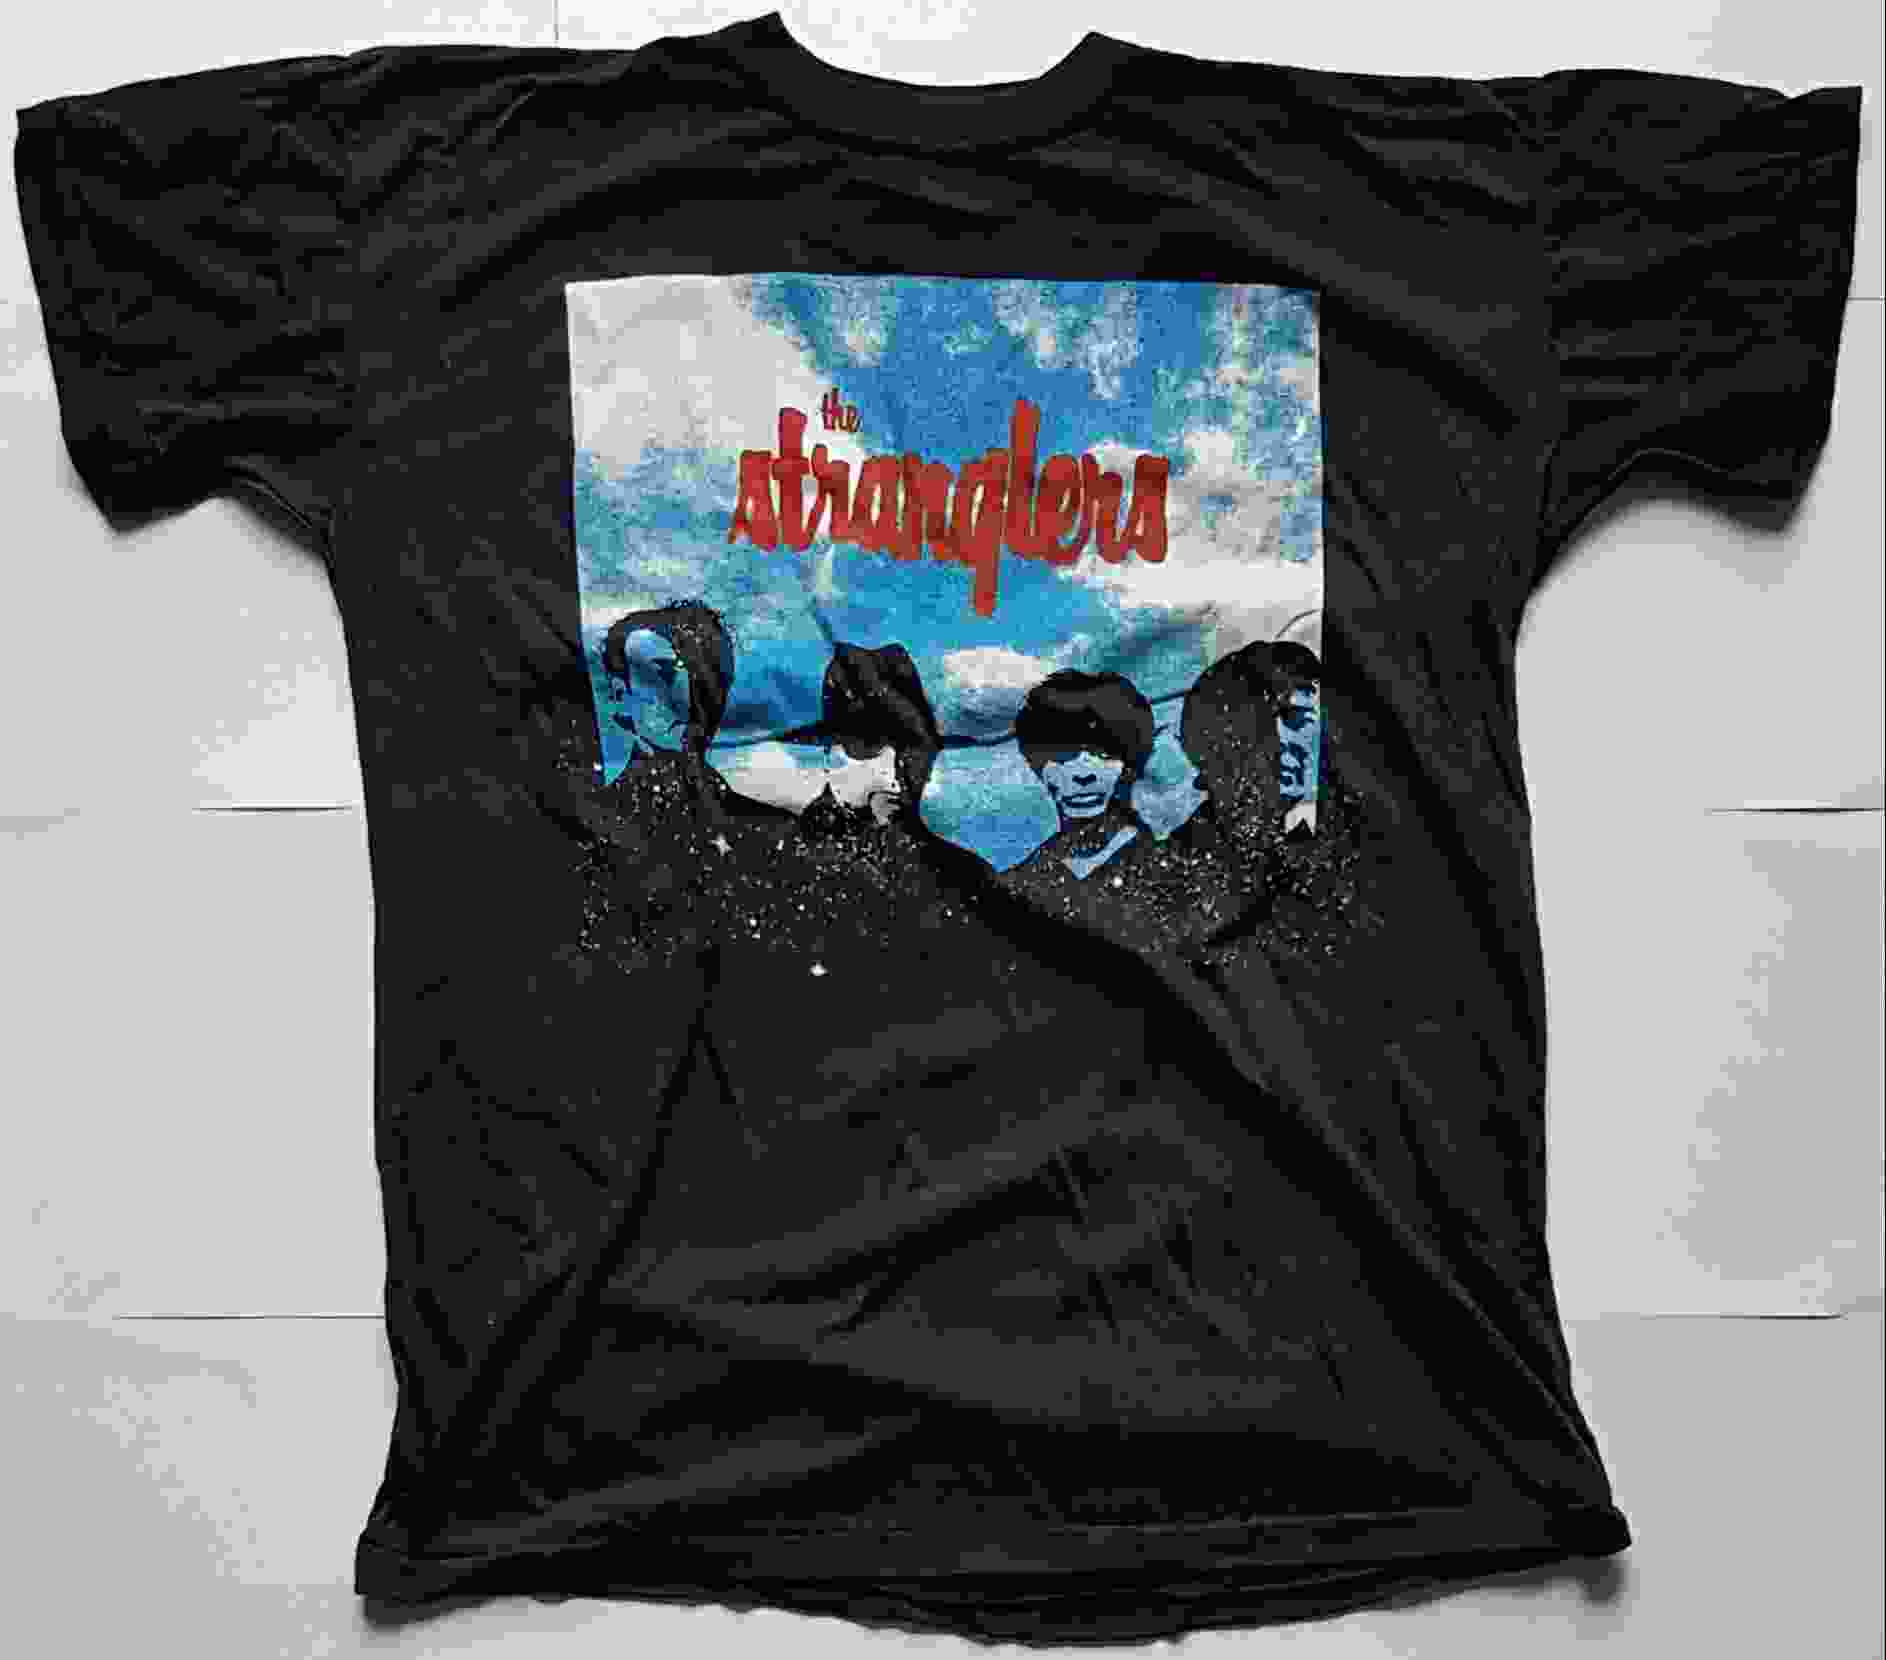 Picture of TS-TS-S Dreamtime U.K. tour 2 by artist The Stranglers from The Stranglers clothes